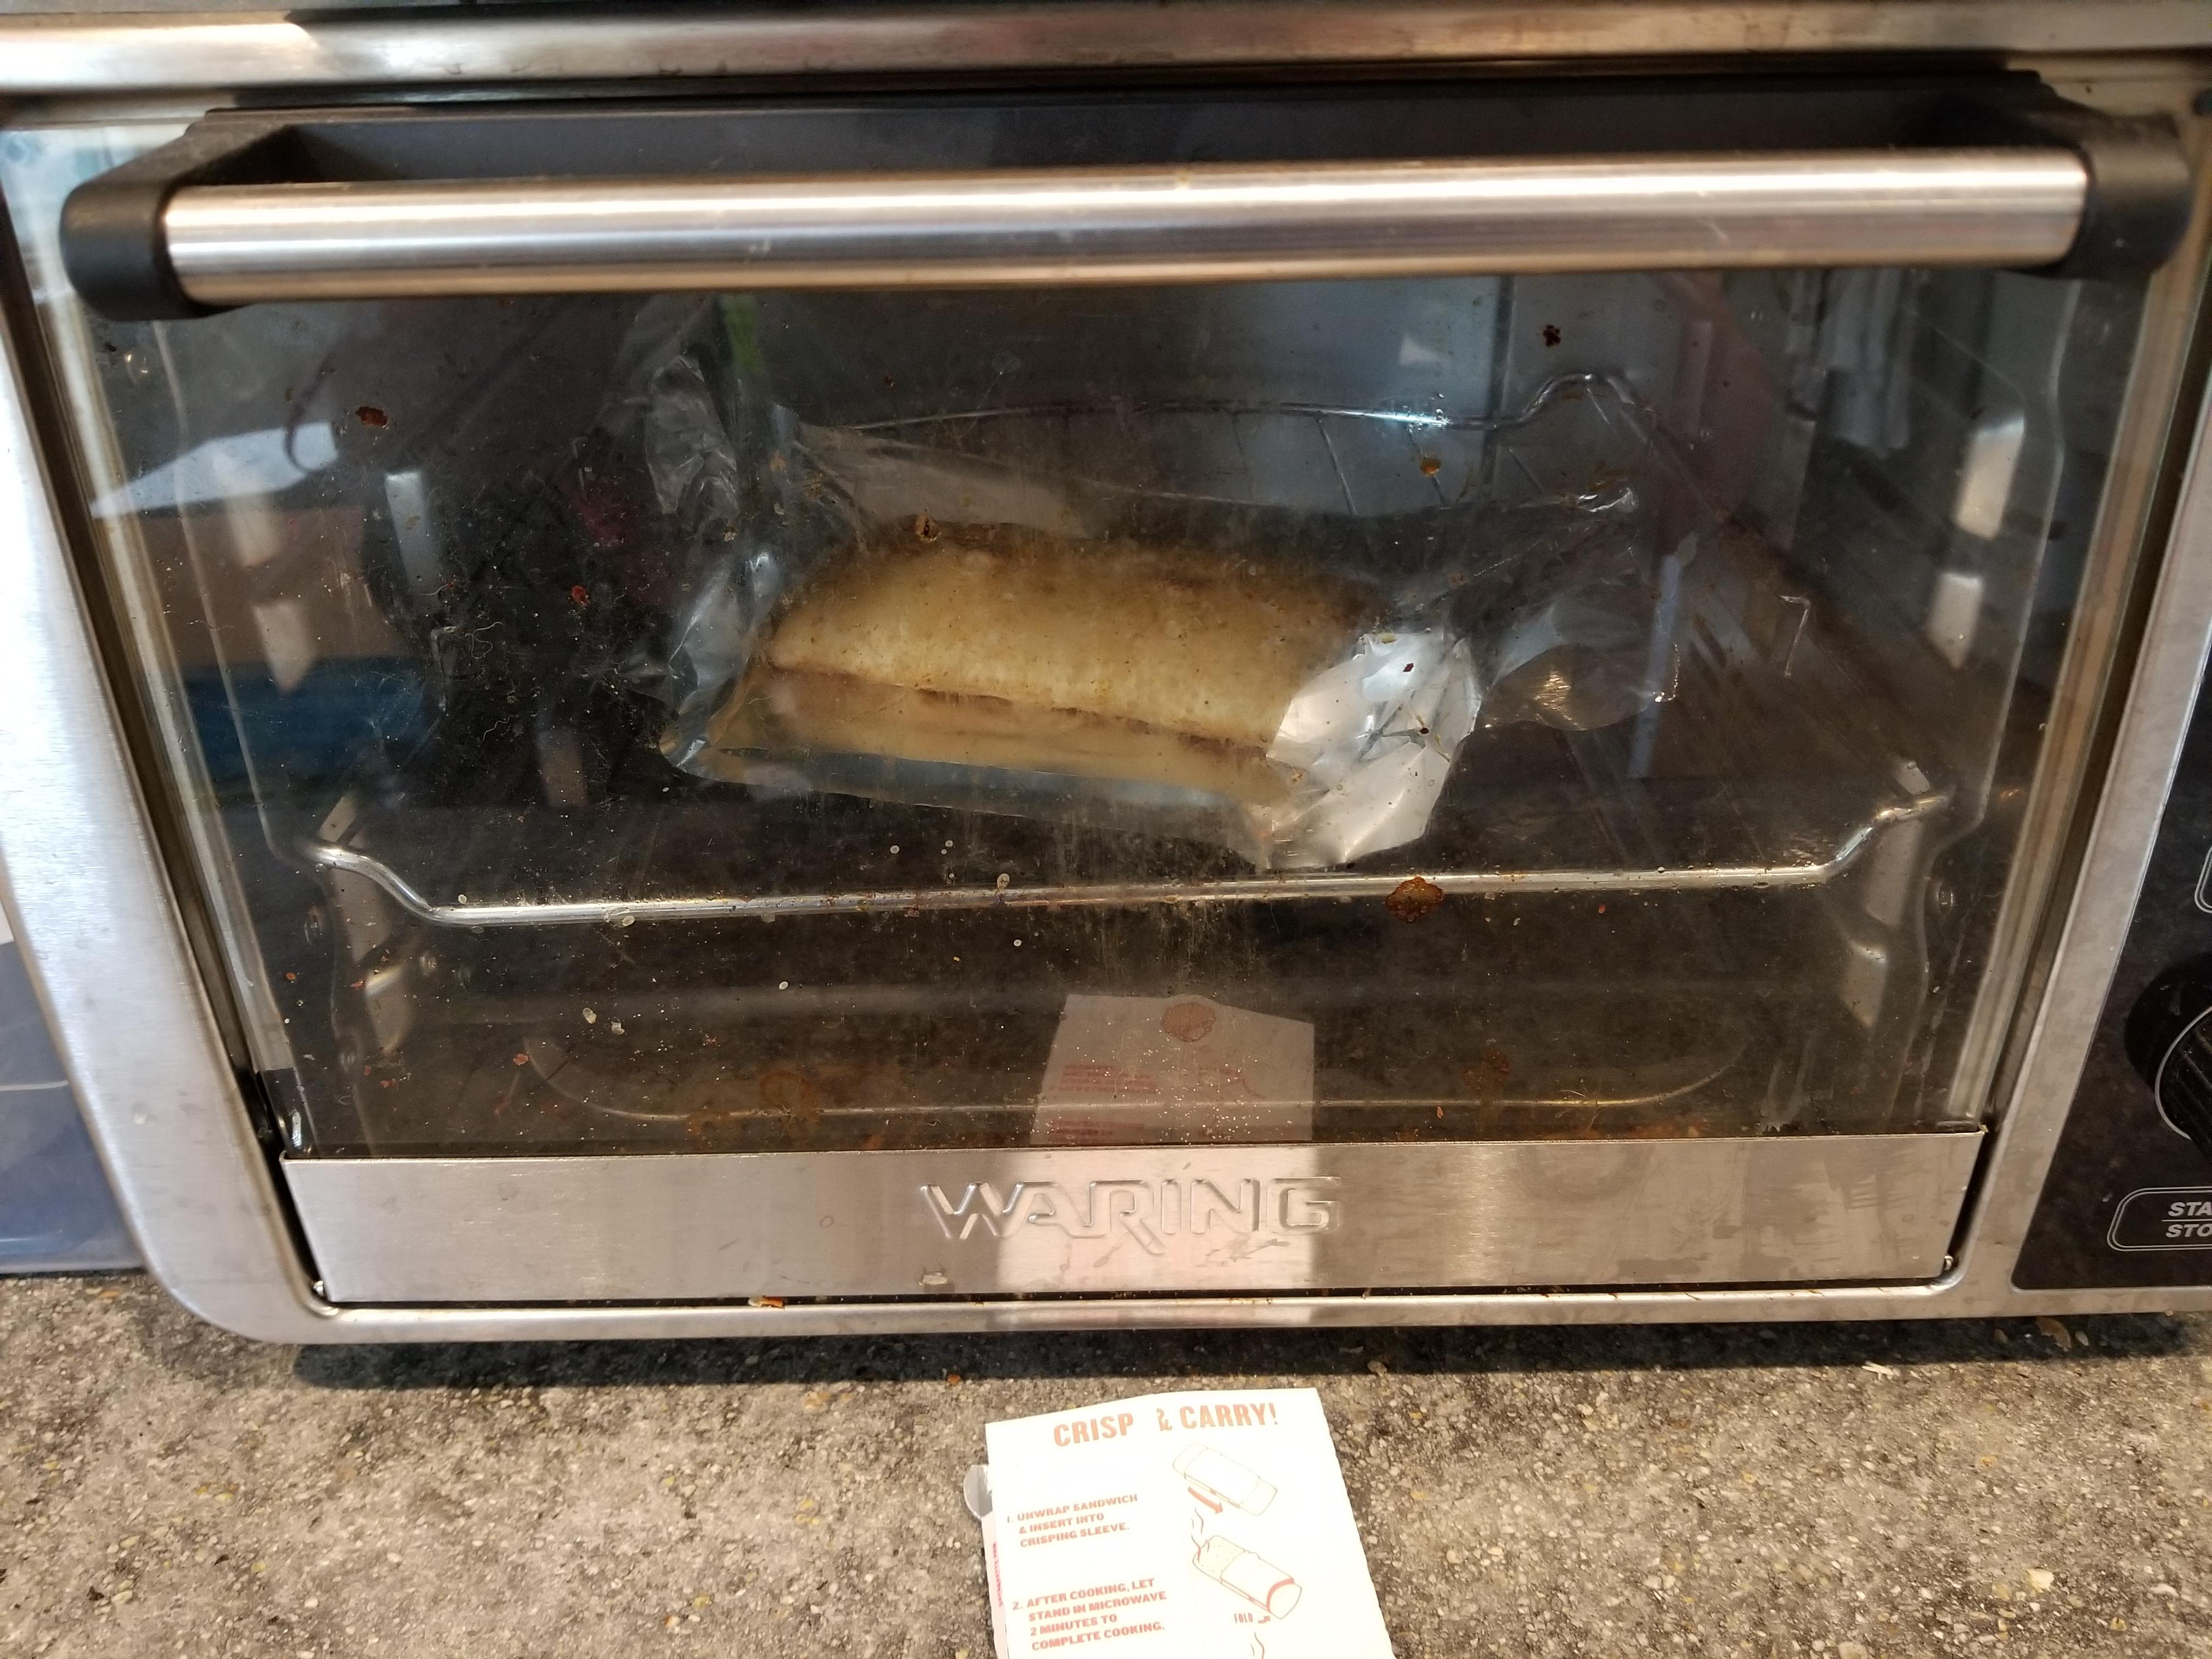 How To Cook A Hot Pocket In A Toaster Oven